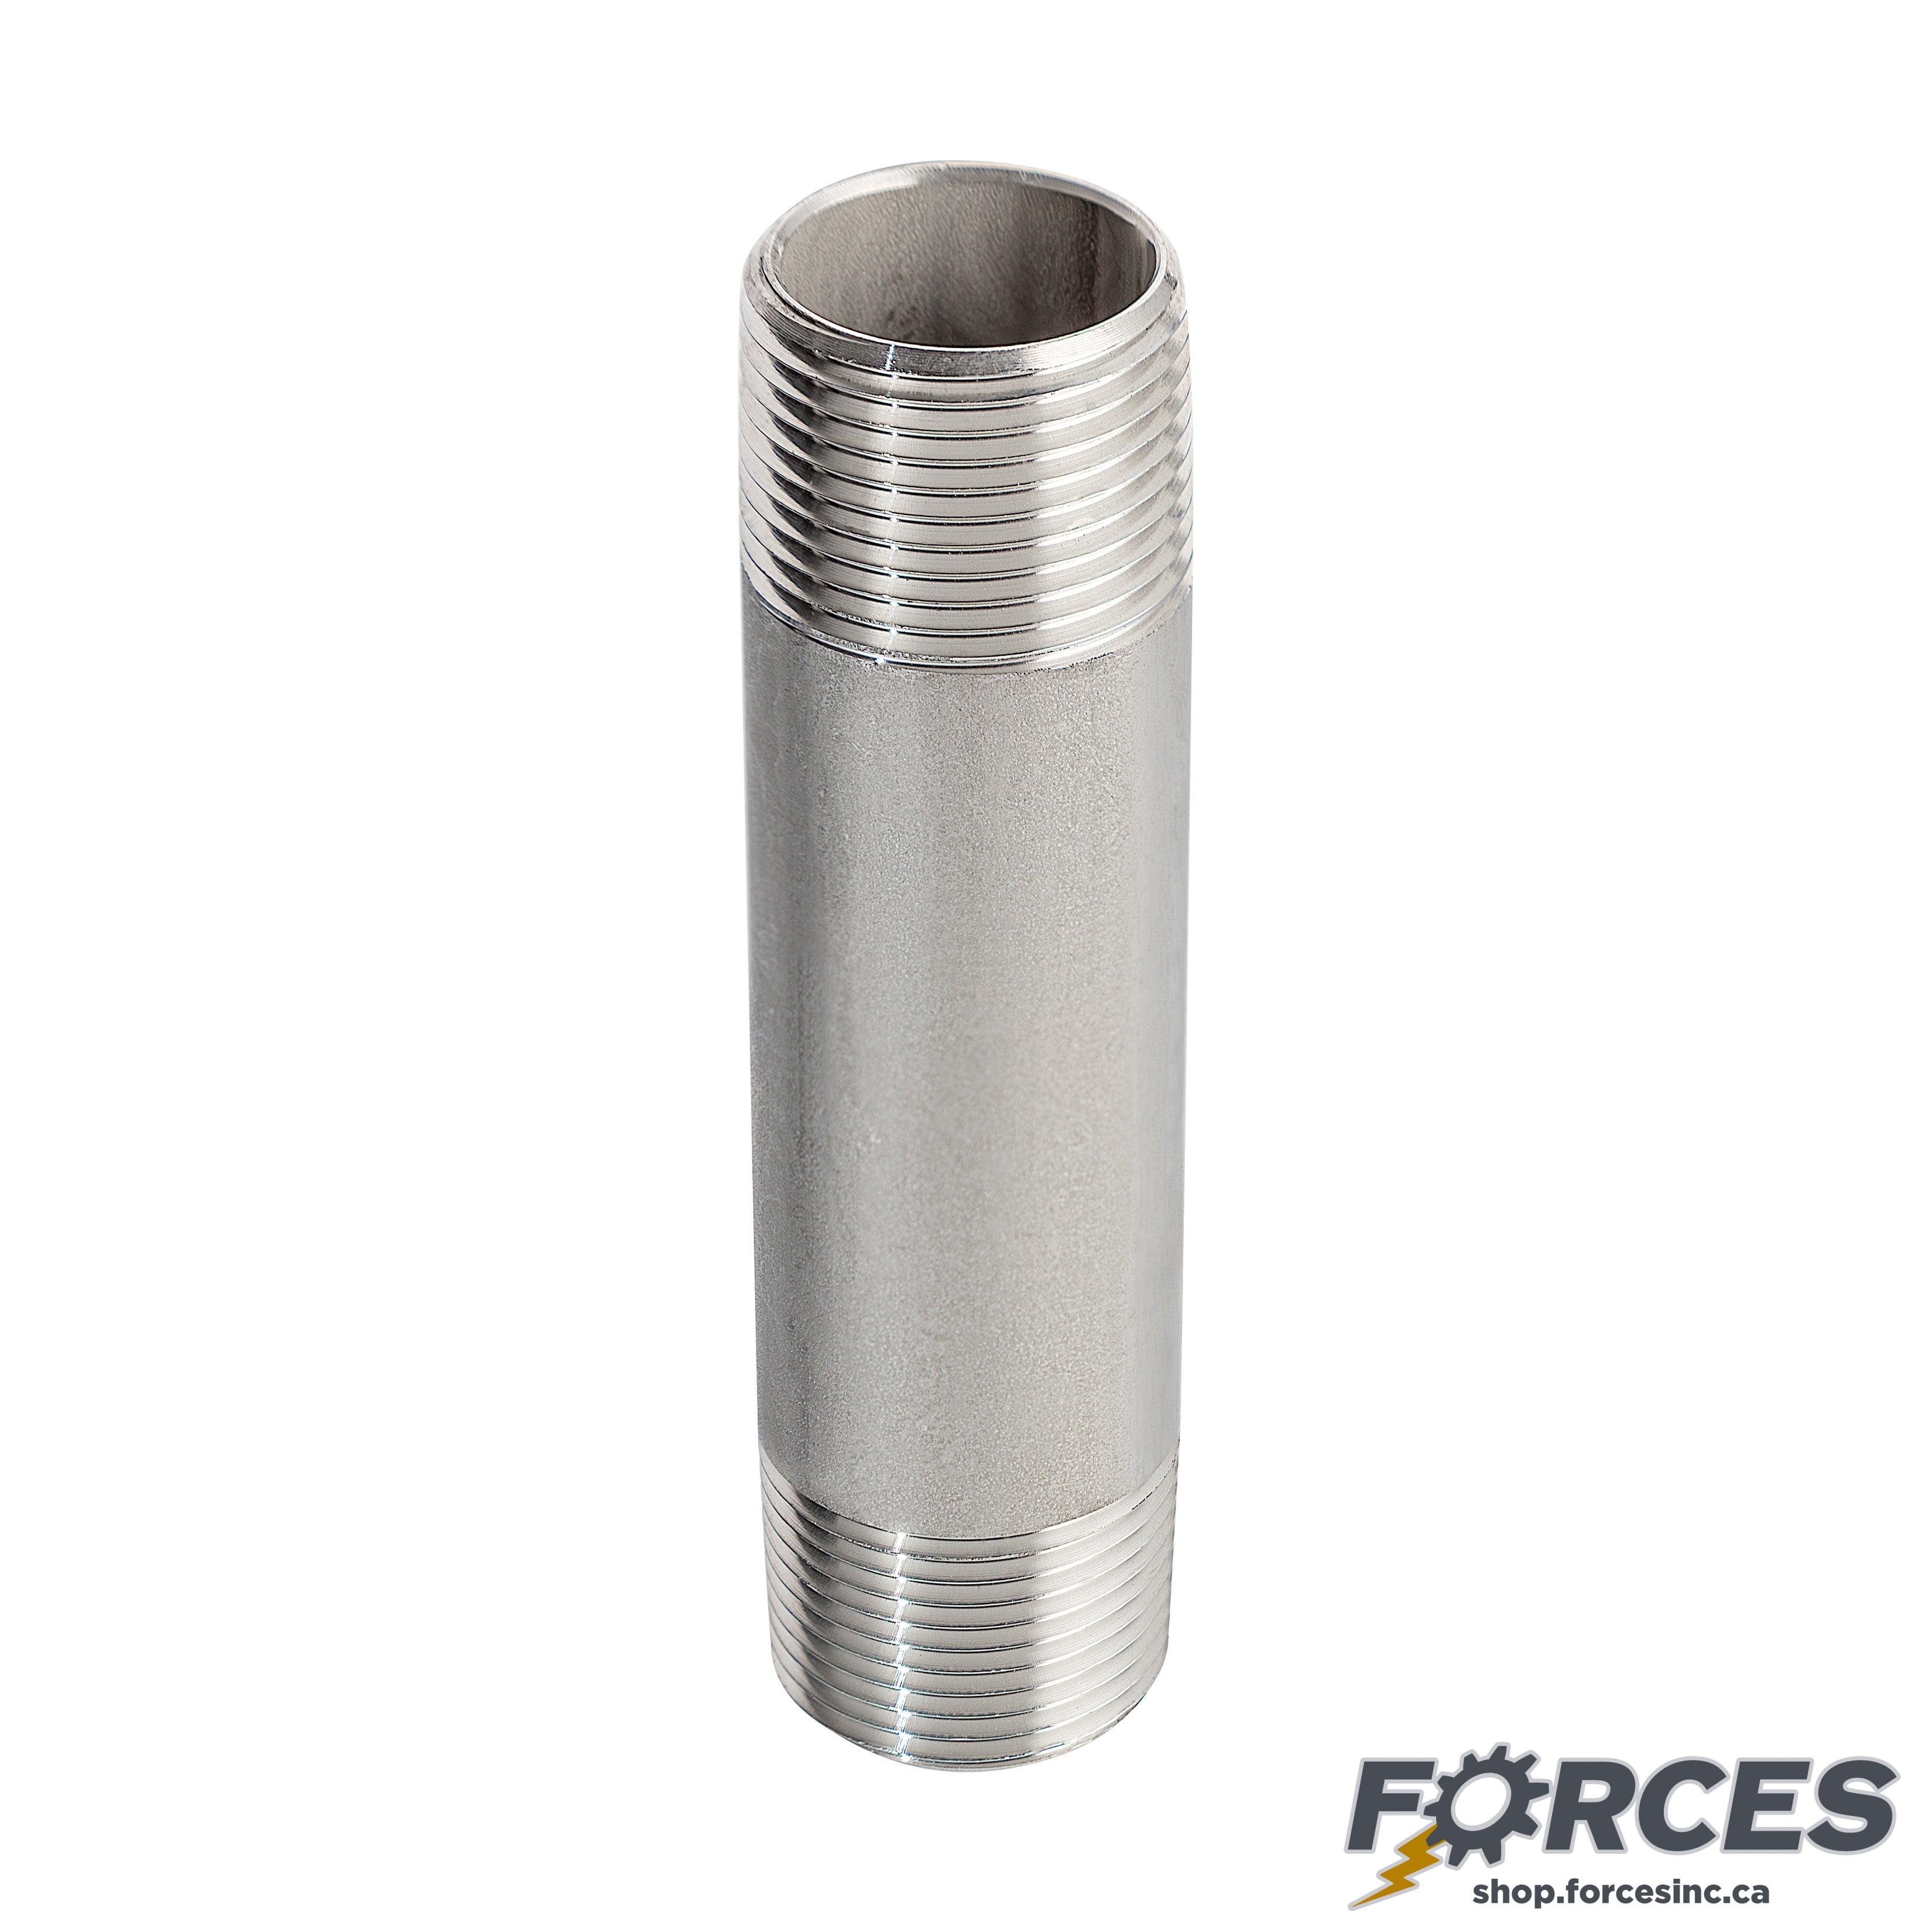 1/2" X 2" Long Nipple - Stainless Steel 316 - Forces Inc